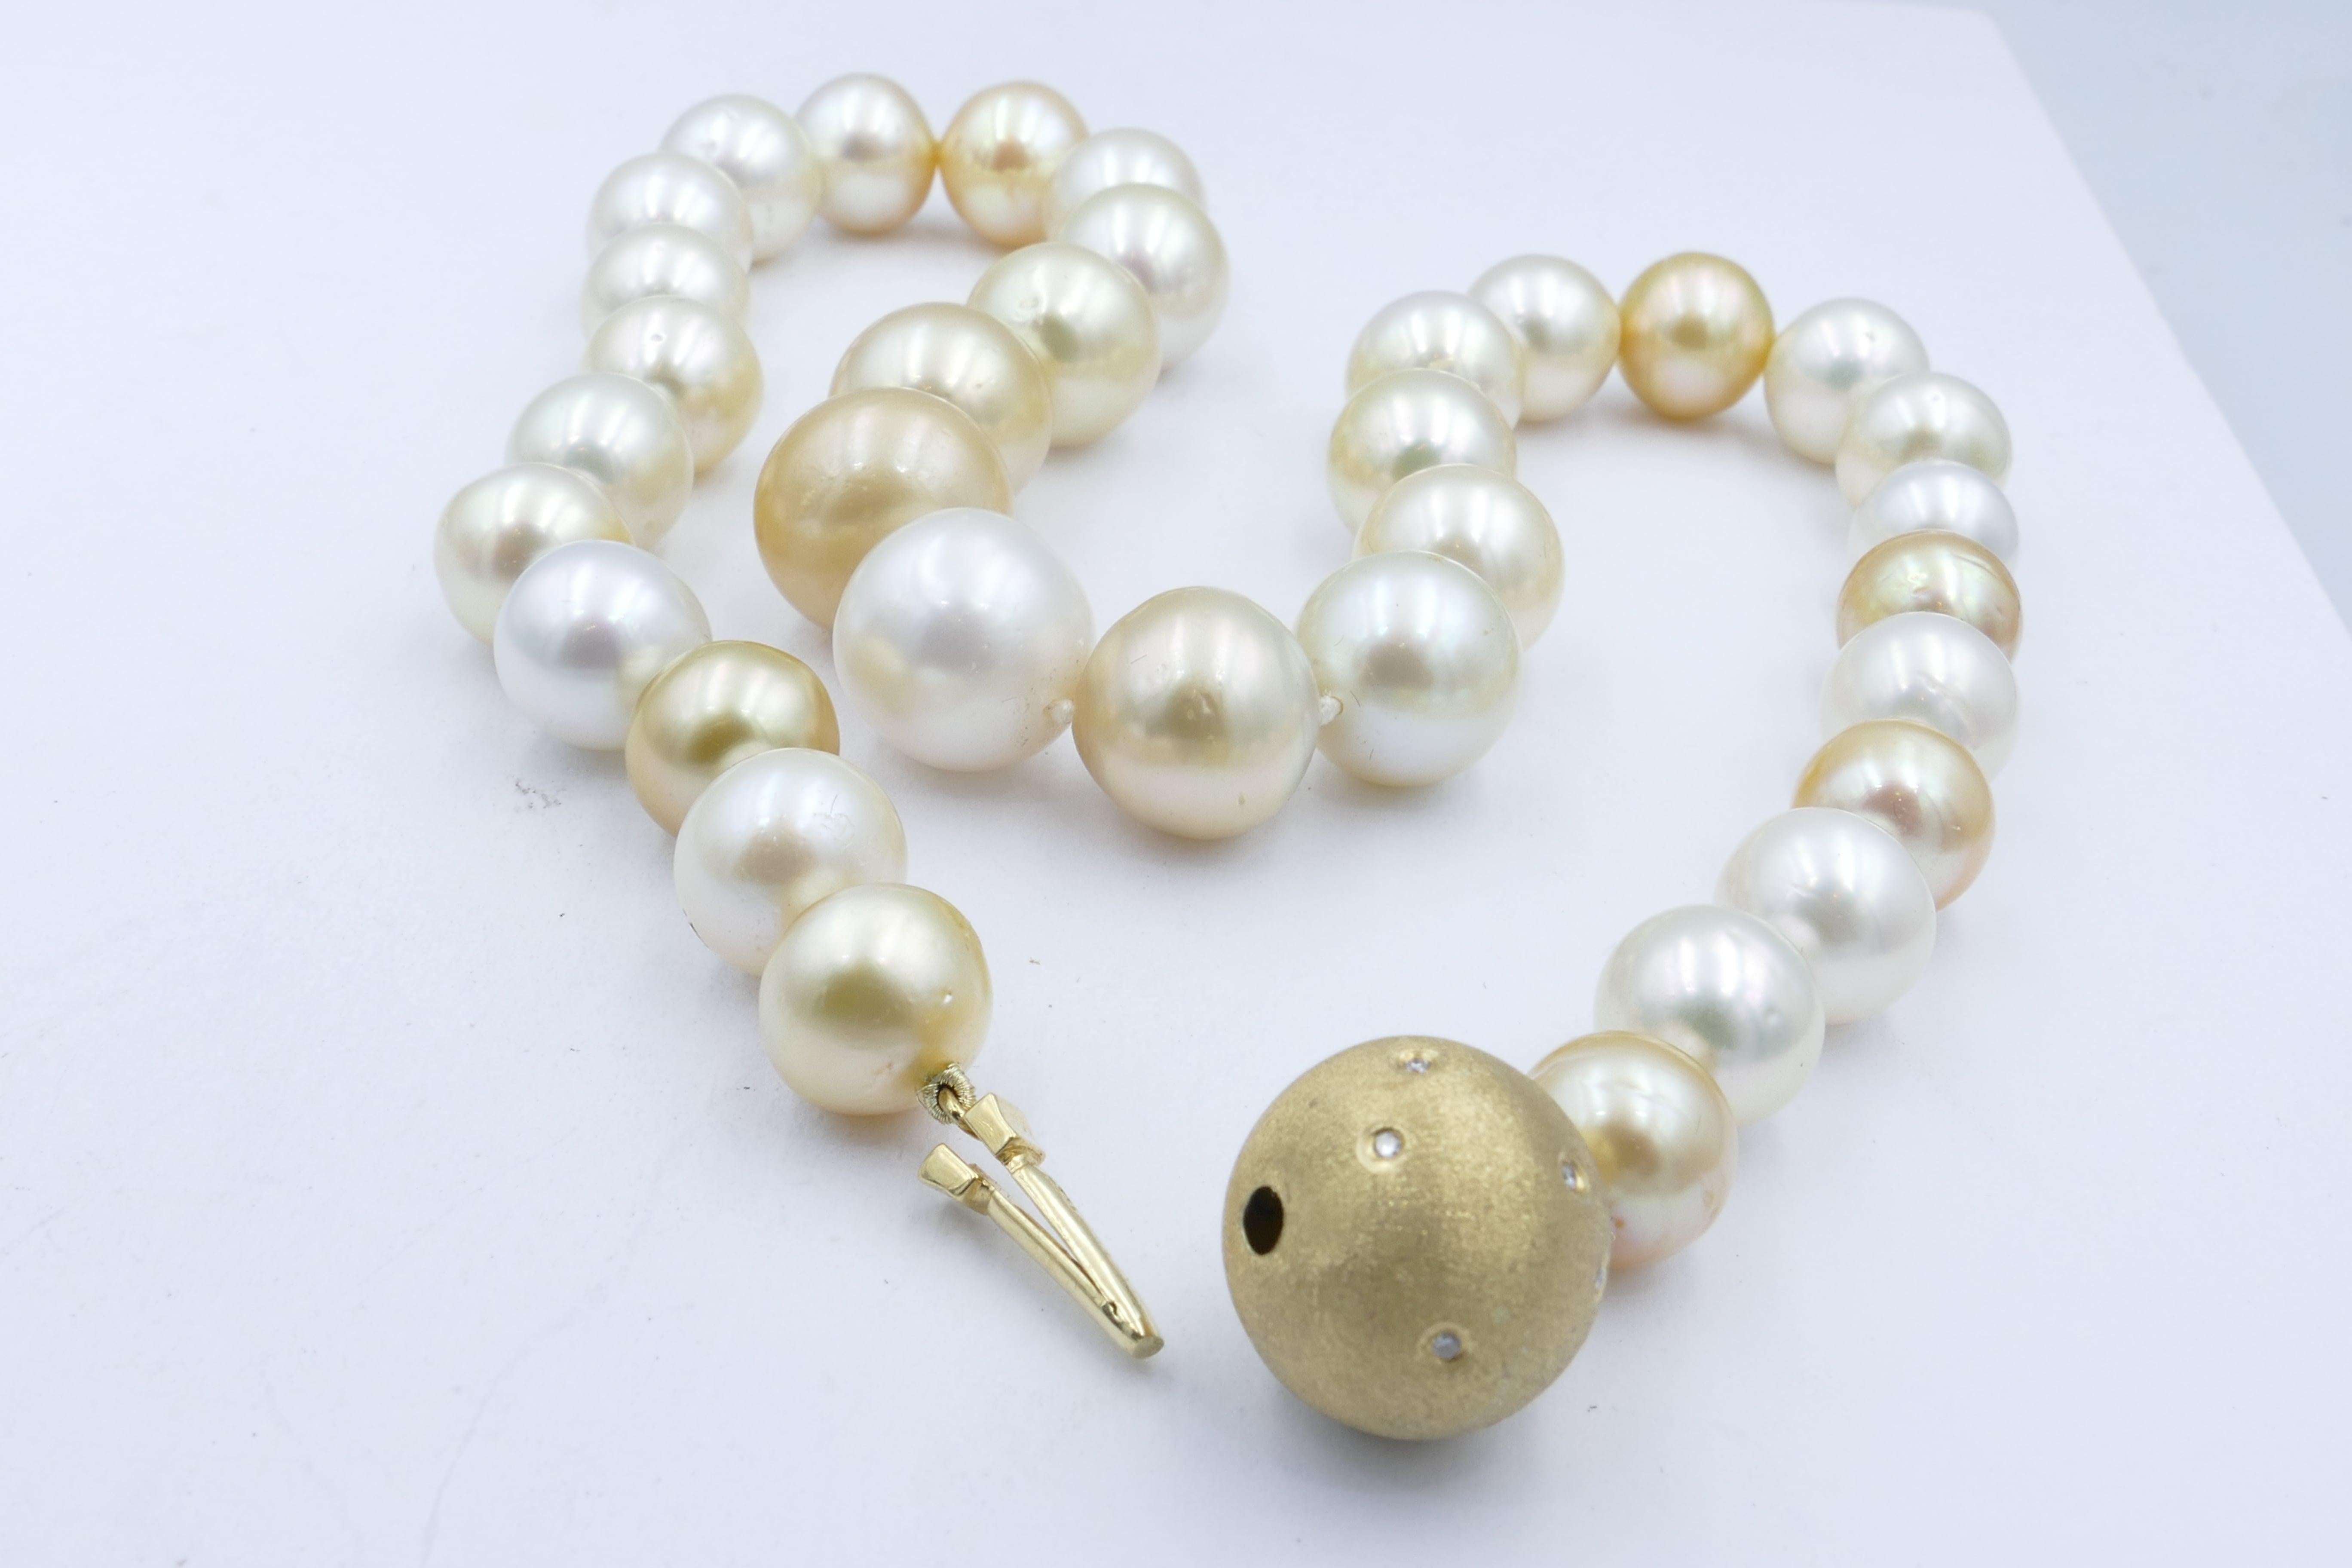 Such a classy Necklace featuring 34 cultured South Sea Pearls, alternating Gold & White in colour, slightly off round in shape, graduated in size 10.0 - 15.2mm in diameter.
It has excellent lustre with only very minor blemishes and is 41 cm